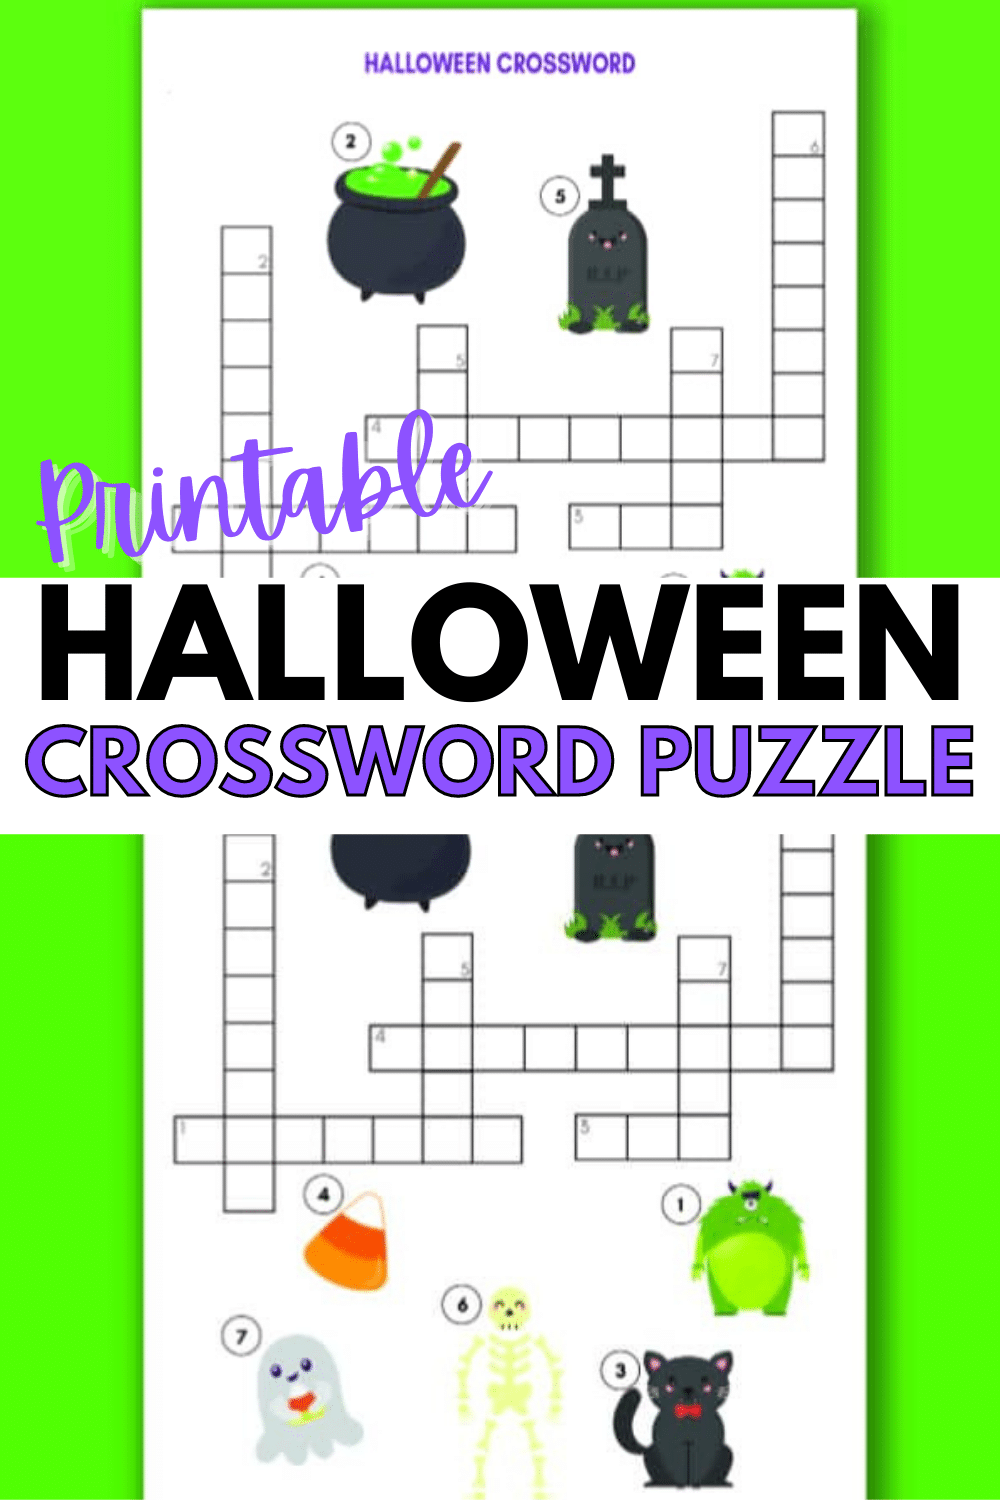 A printable Halloween crossword puzzle is great for school, fall parties or just for fun at home. Crossword puzzles are a great activity for kids. #crosswordpuzzle #halloween #printables via @wondermomwannab